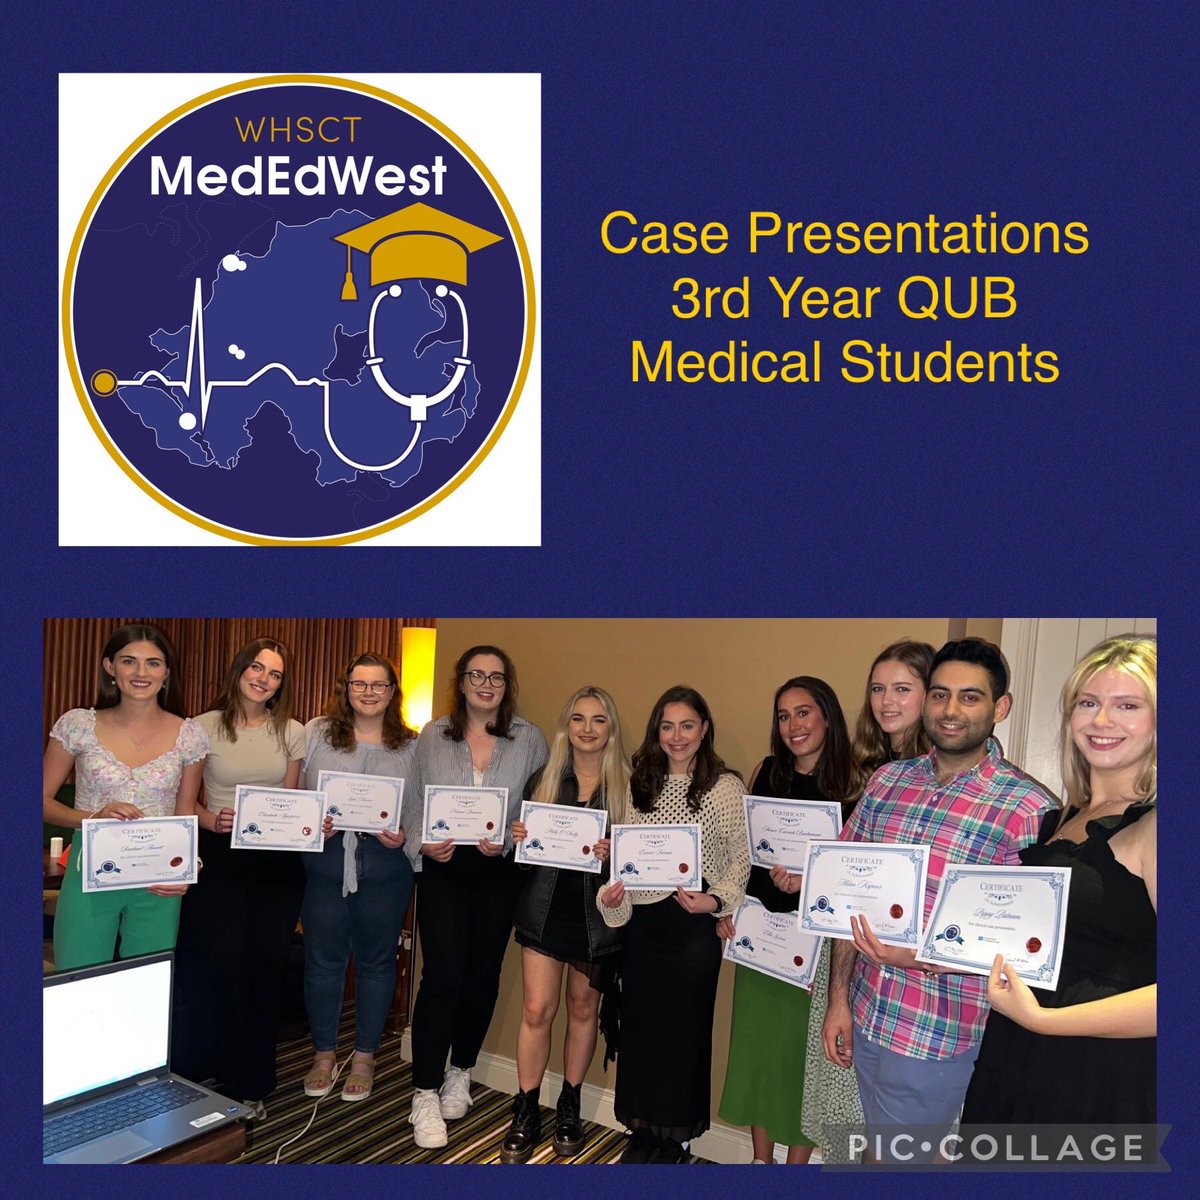 👏Another successful Medical Education event of Education & Collegiality.  Showcase of 3rd Year @QUBMedEd Case Presentations ✅ Opportunity to learn in a convivial setting ✅ Informative and enjoyable learning @WesternHSCTrust #GreatPlacetoLearn @NAMEM_UK